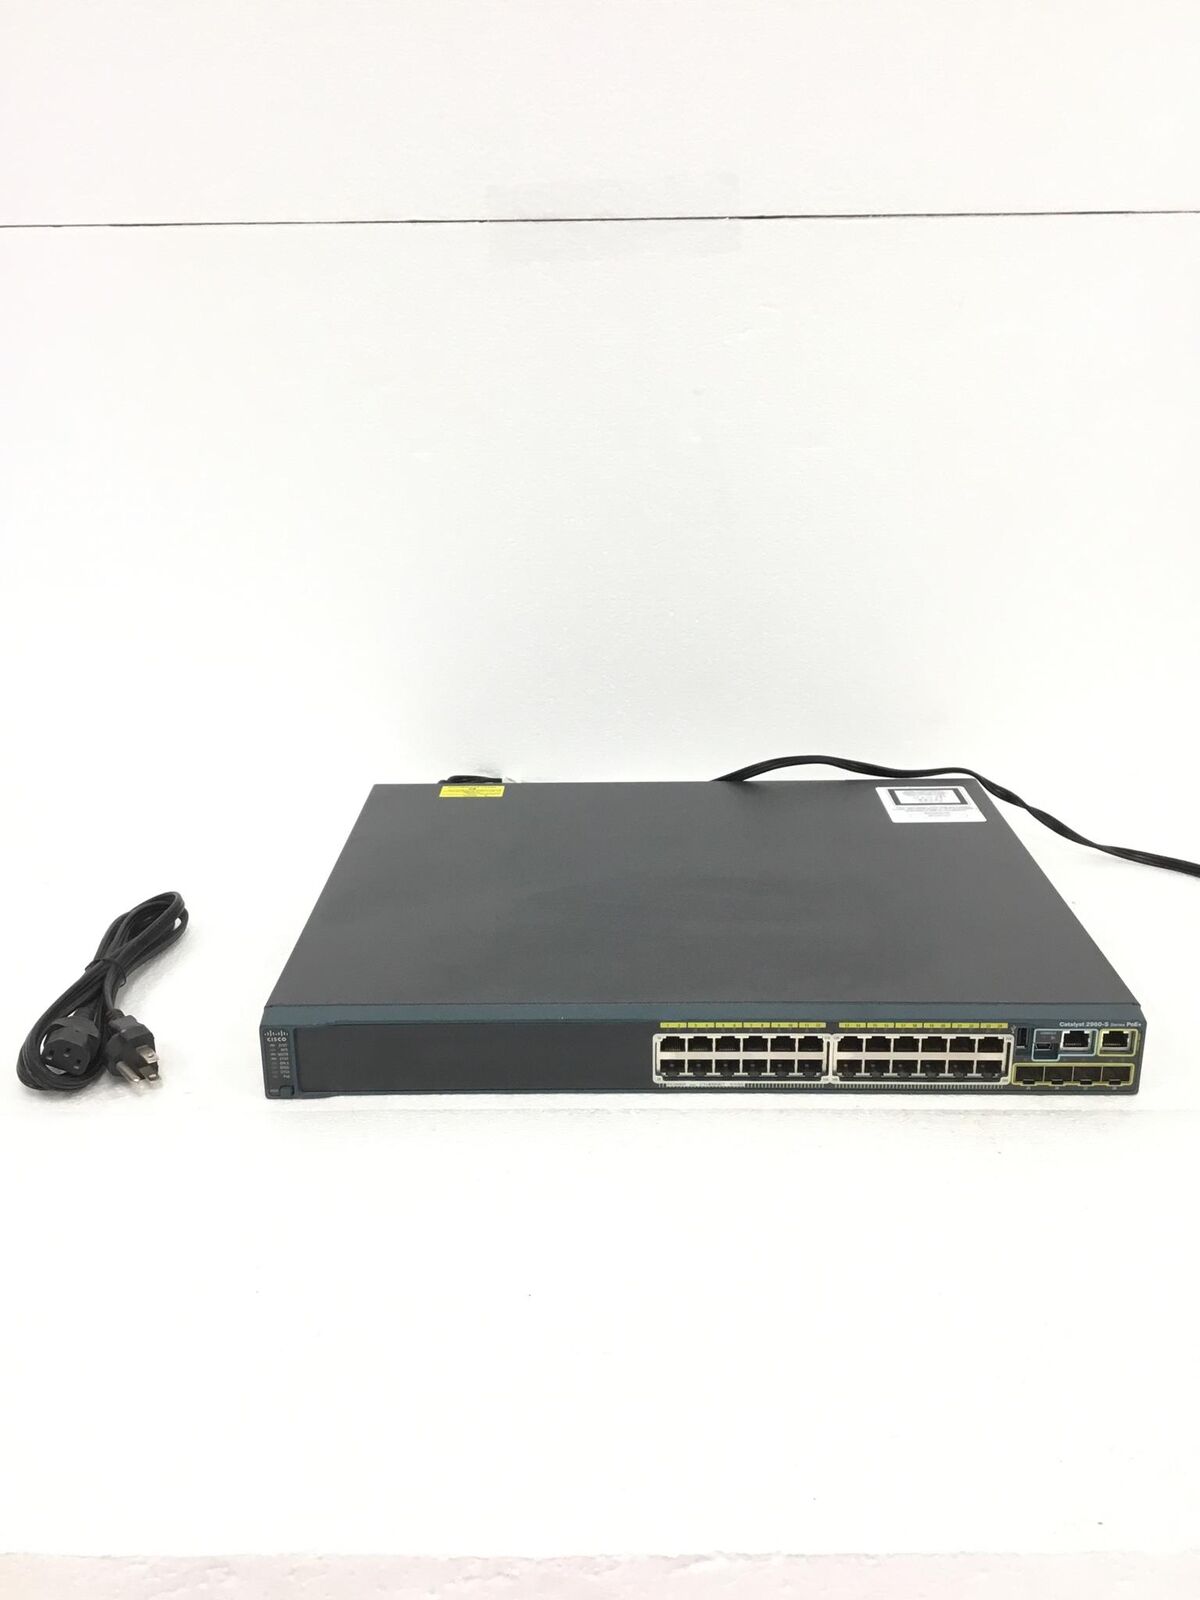 Cisco Catalyst 2960-S Series Poe+ WS-C2960-24PS-L V02 Switch 24 Port Used Works